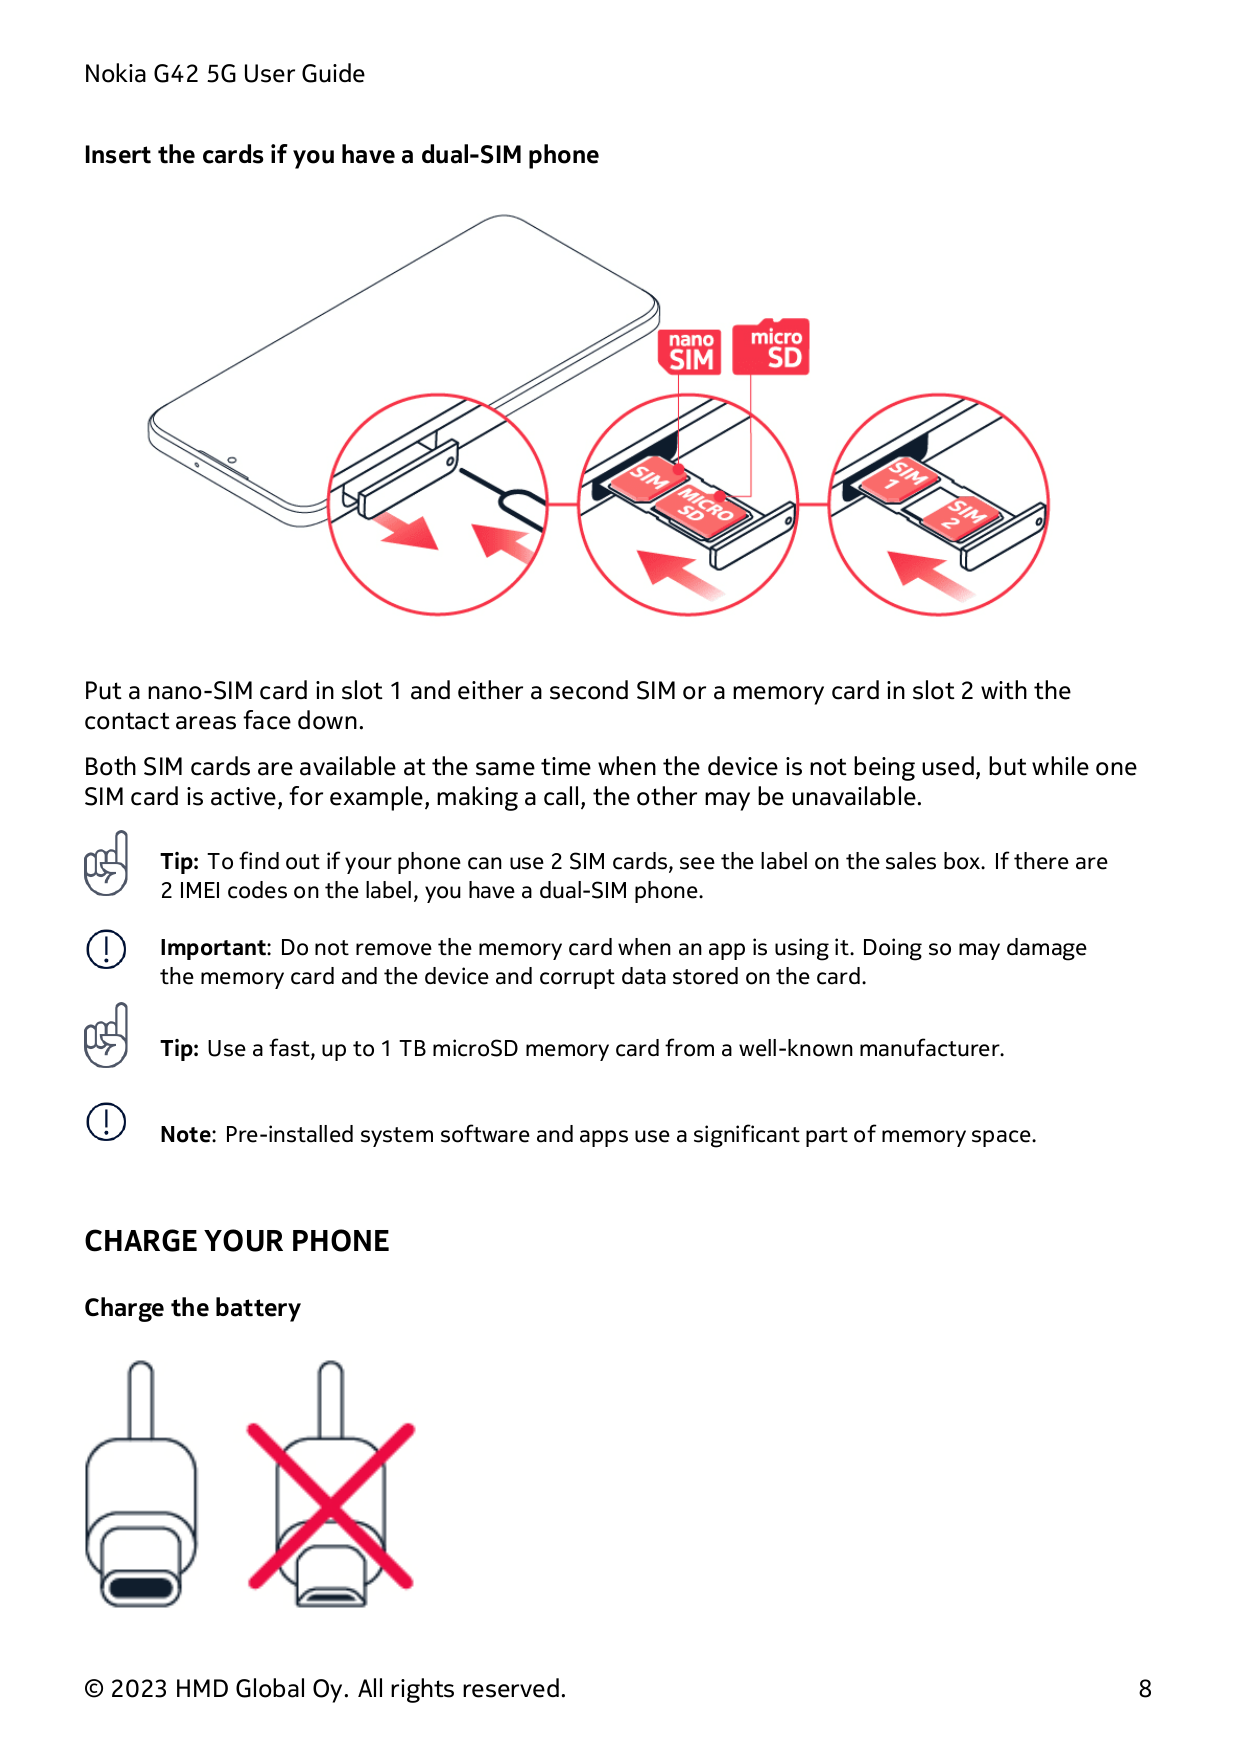 Nokia G42 5G User GuideInsert the cards if you have a dual-SIM phonePut a nano-SIM card in slot 1 and either a second SIM or a m